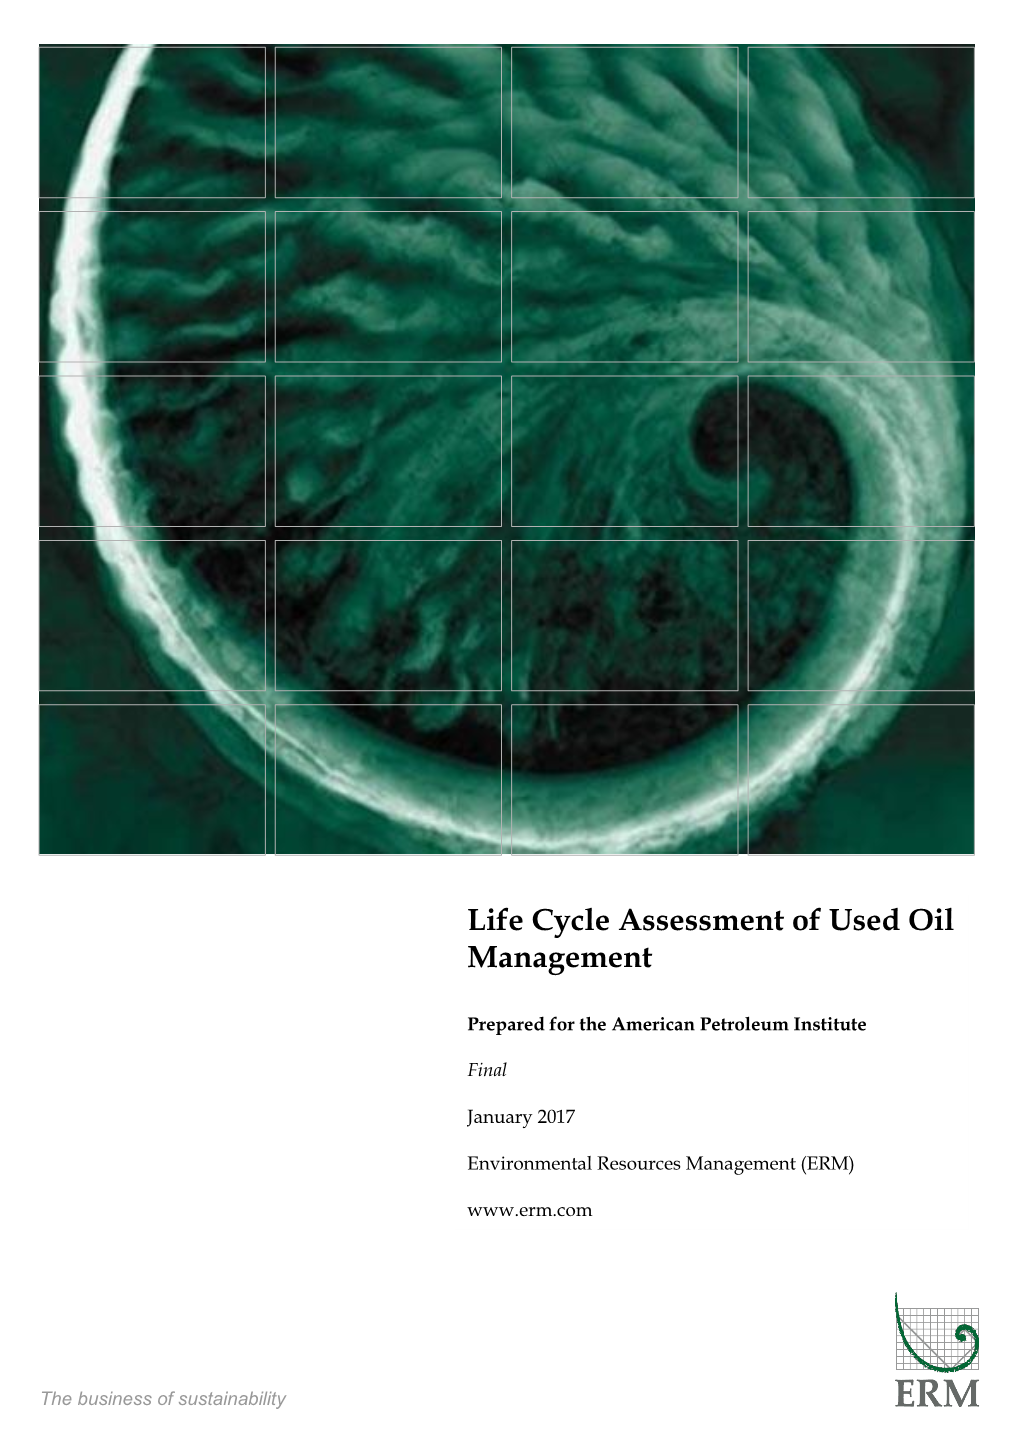 Life Cycle Assessment of Used Oil Management